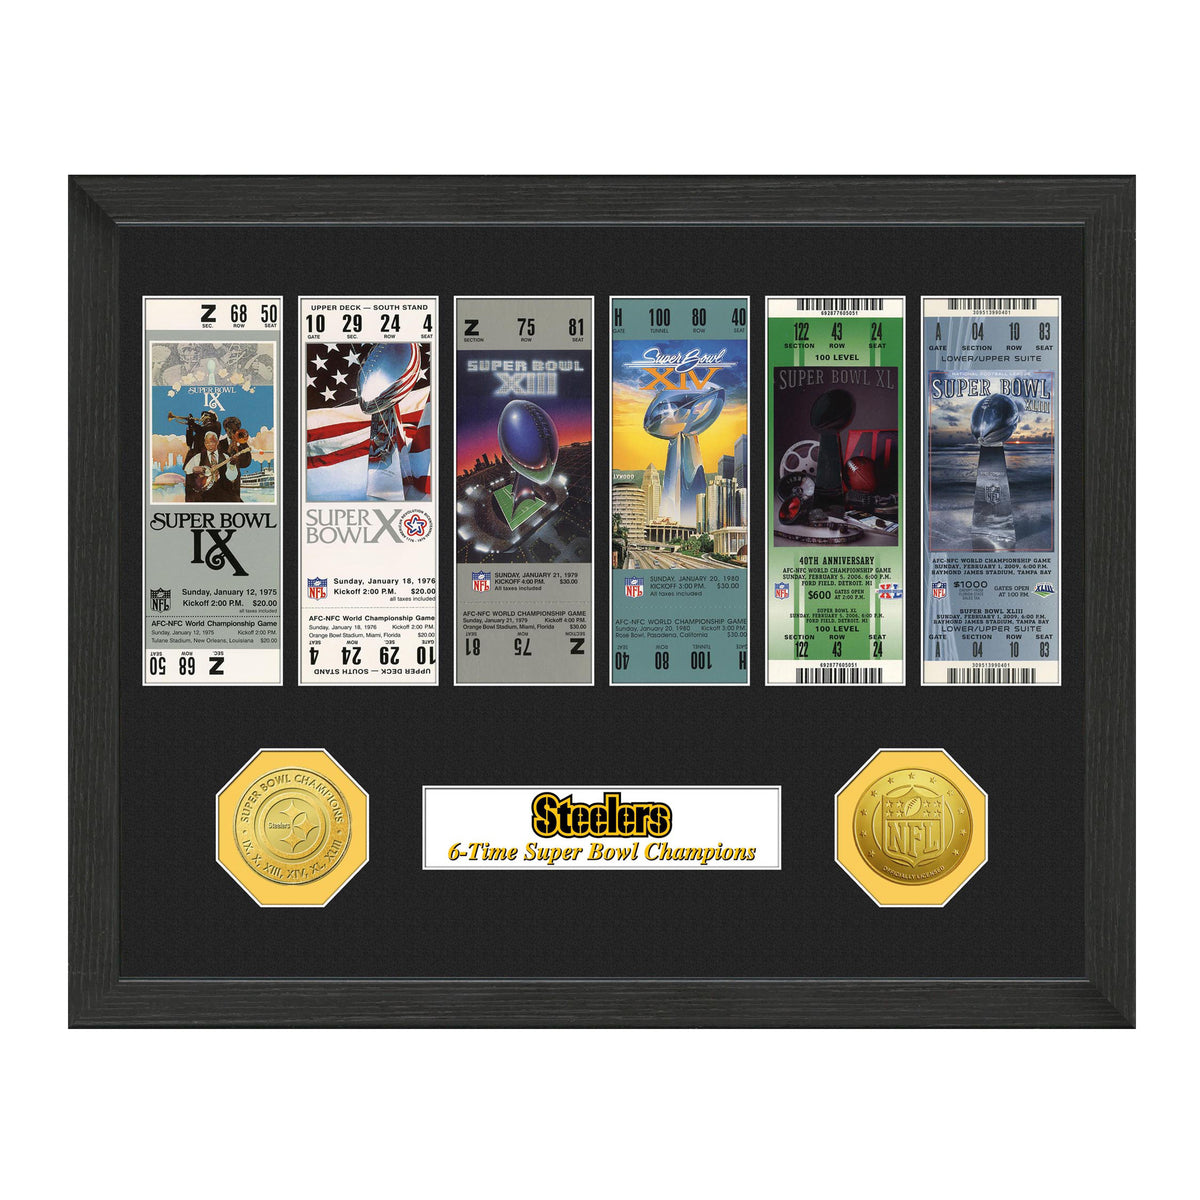 Pittsburgh Steelers Super Bowl Champions Ticket Collections Frame